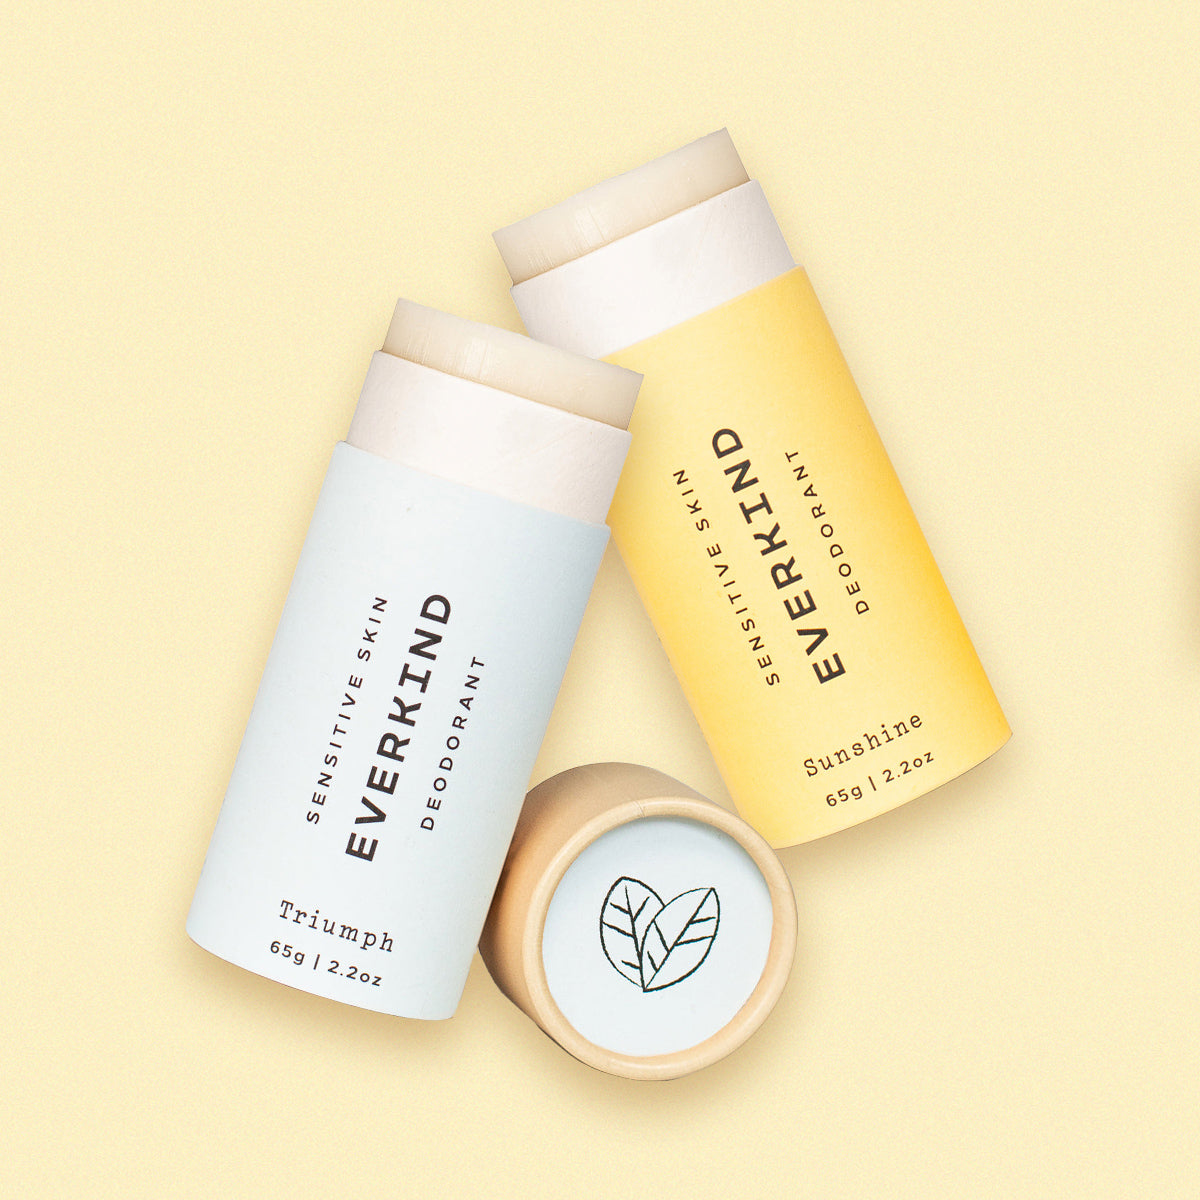 Everkind has a sensitive skin deodorant bundle to care for underarms that can't tolerate sodium bicarbonate. Made with supplement quality marine magnesium Sunshine and Triumph are your gentle pick.